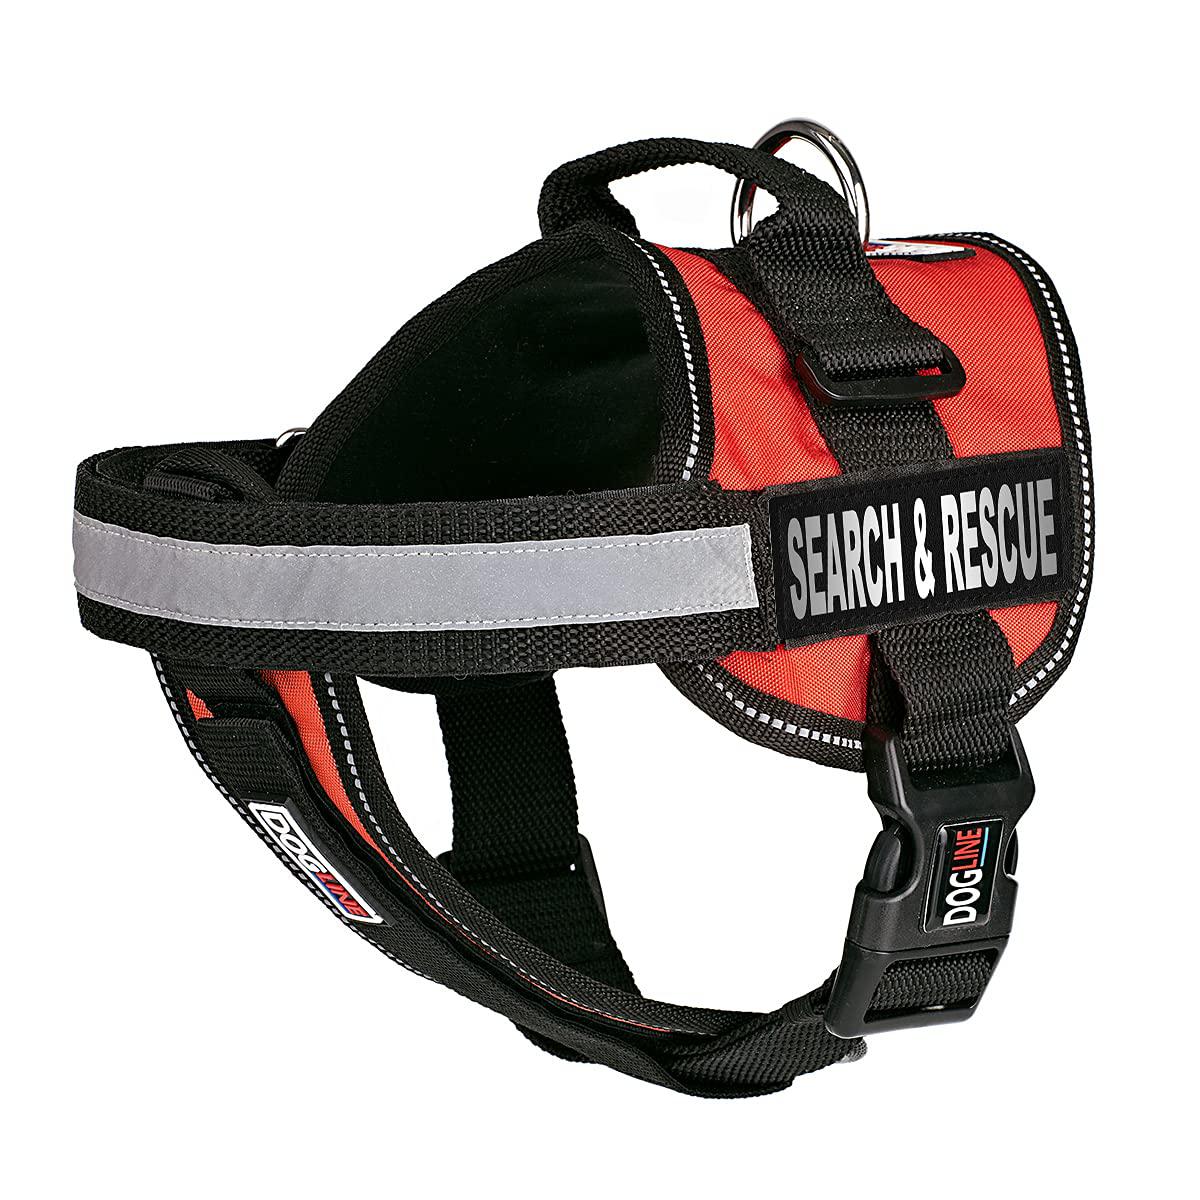 dogline unimax multi-purpose vest harness for dogs and 2 removable search and rescue patches, large, red